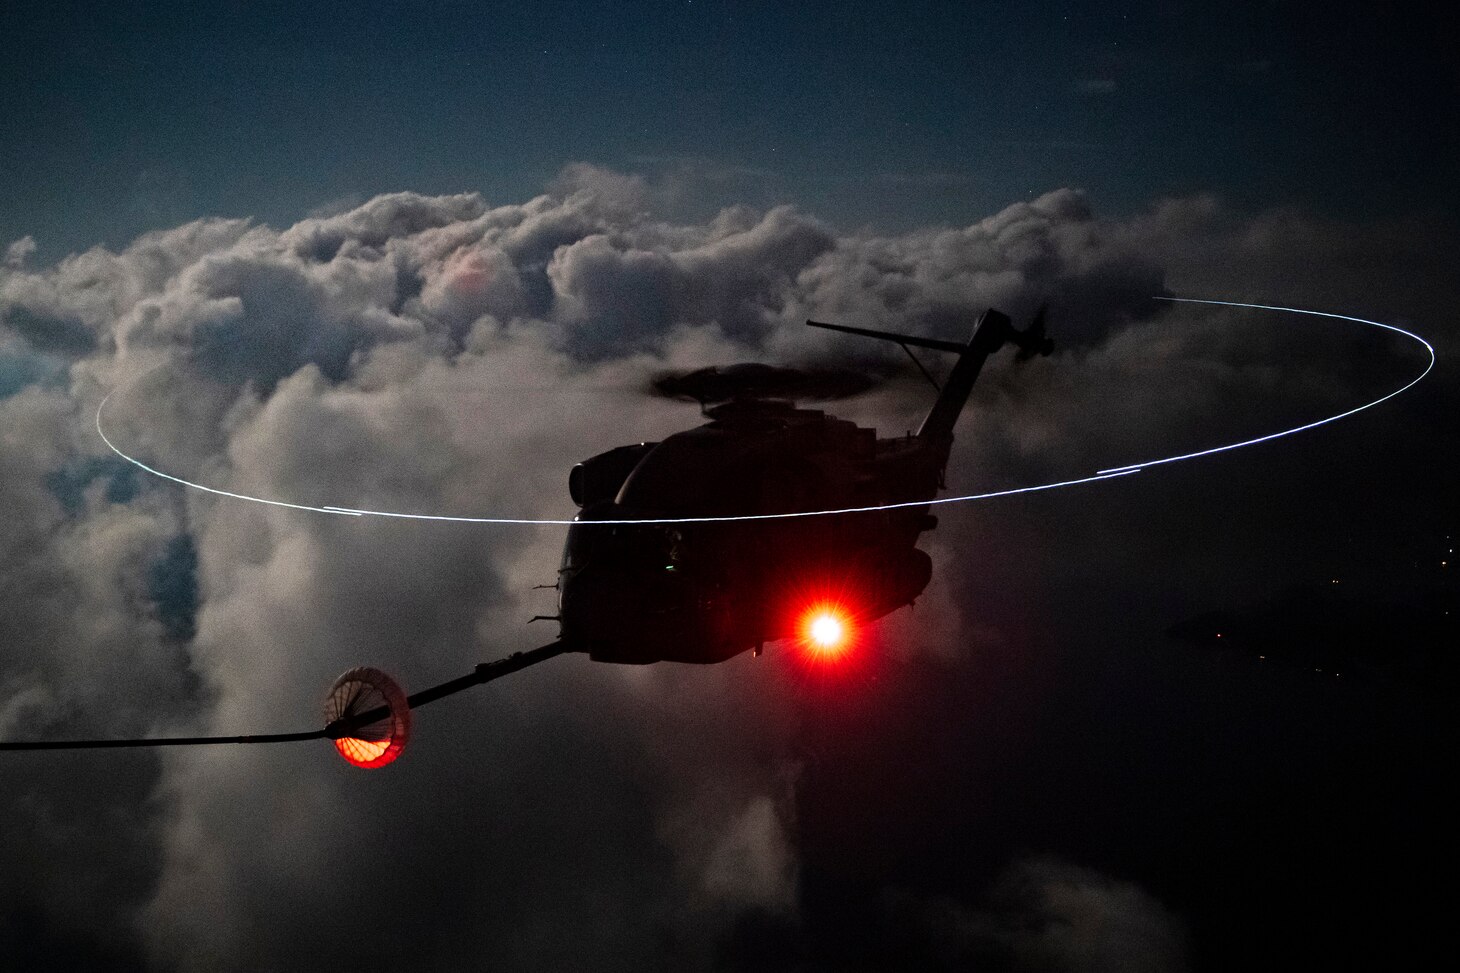 CH-53K First Night Air to Air Refueling, 23 June 2021, NAS Patuxent River, Md.